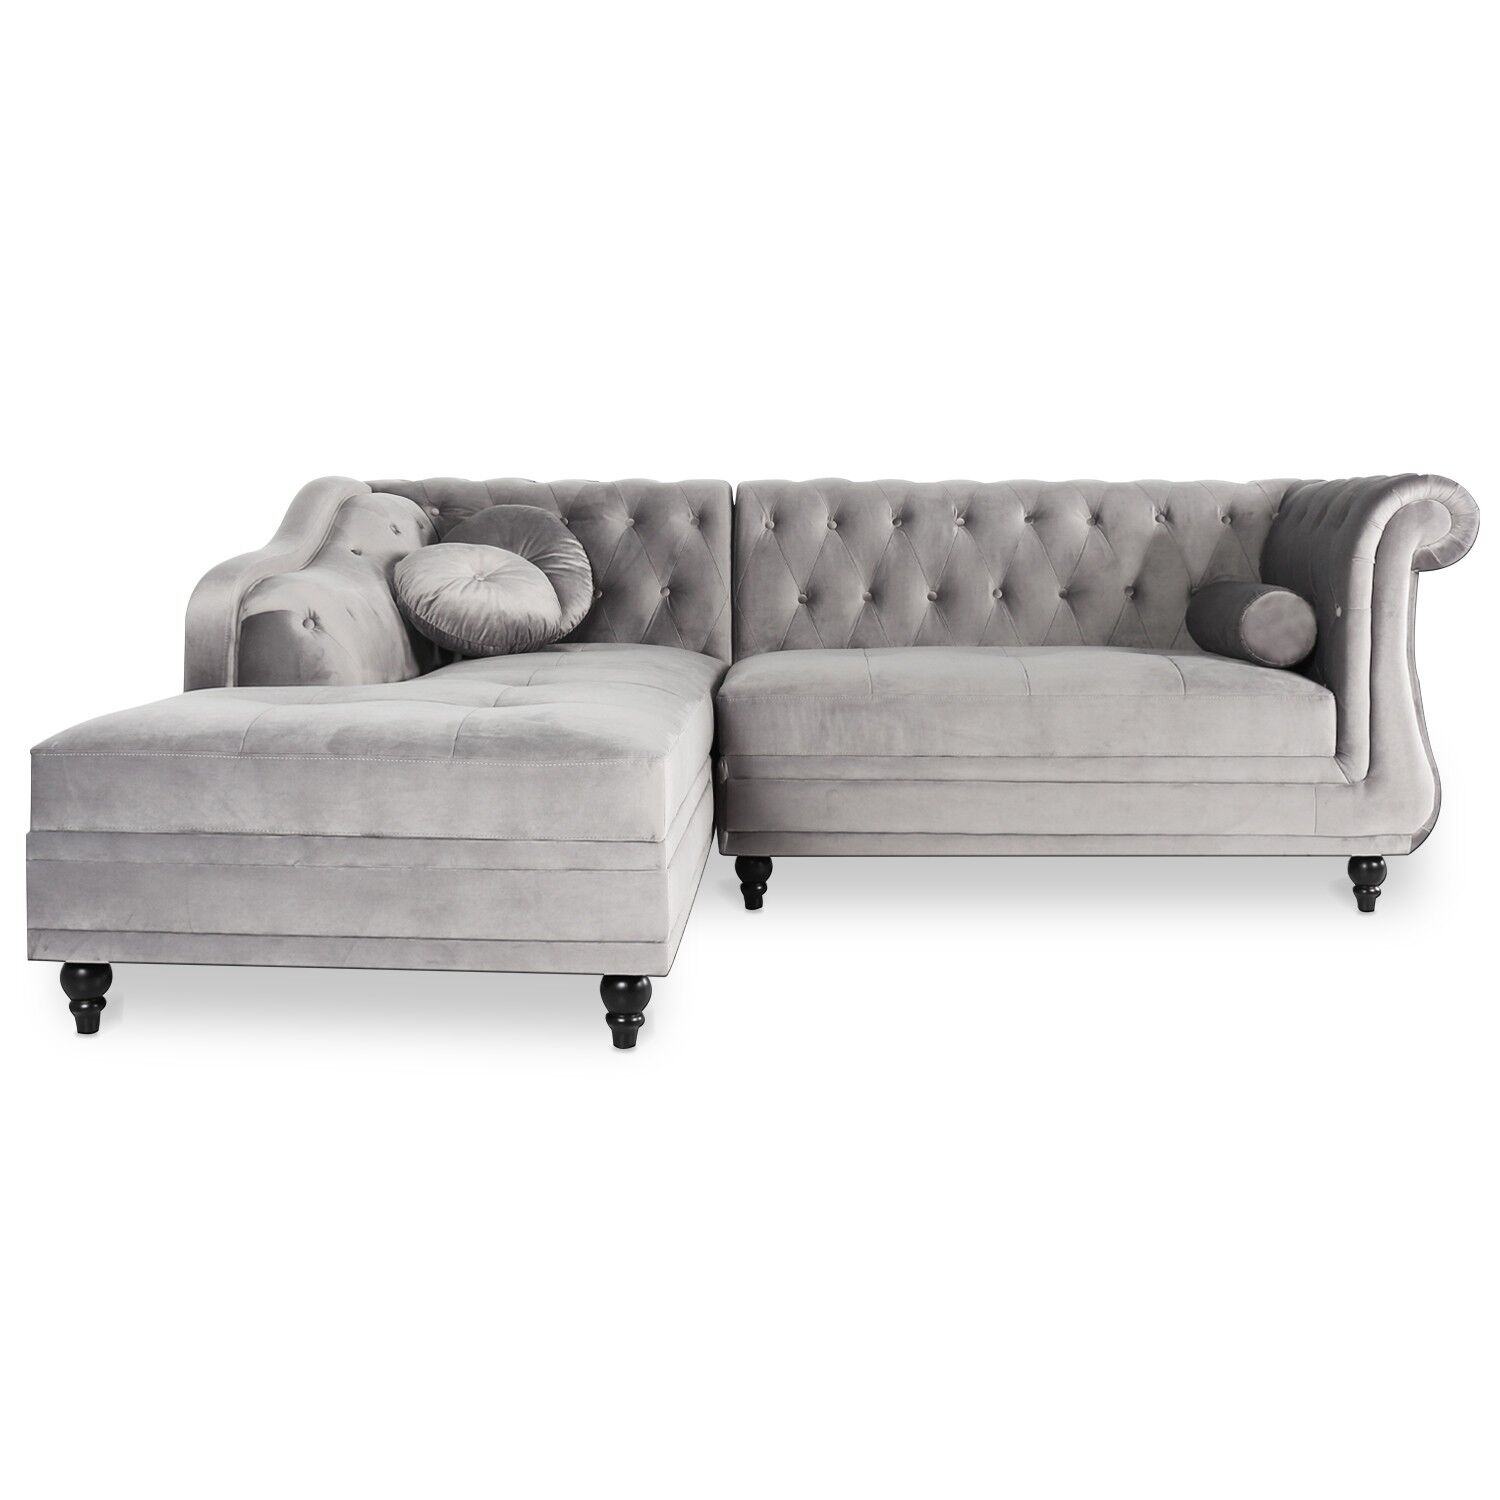 IntenseDeco Canapé d'angle gauche Empire Velours Argent style Chesterfield